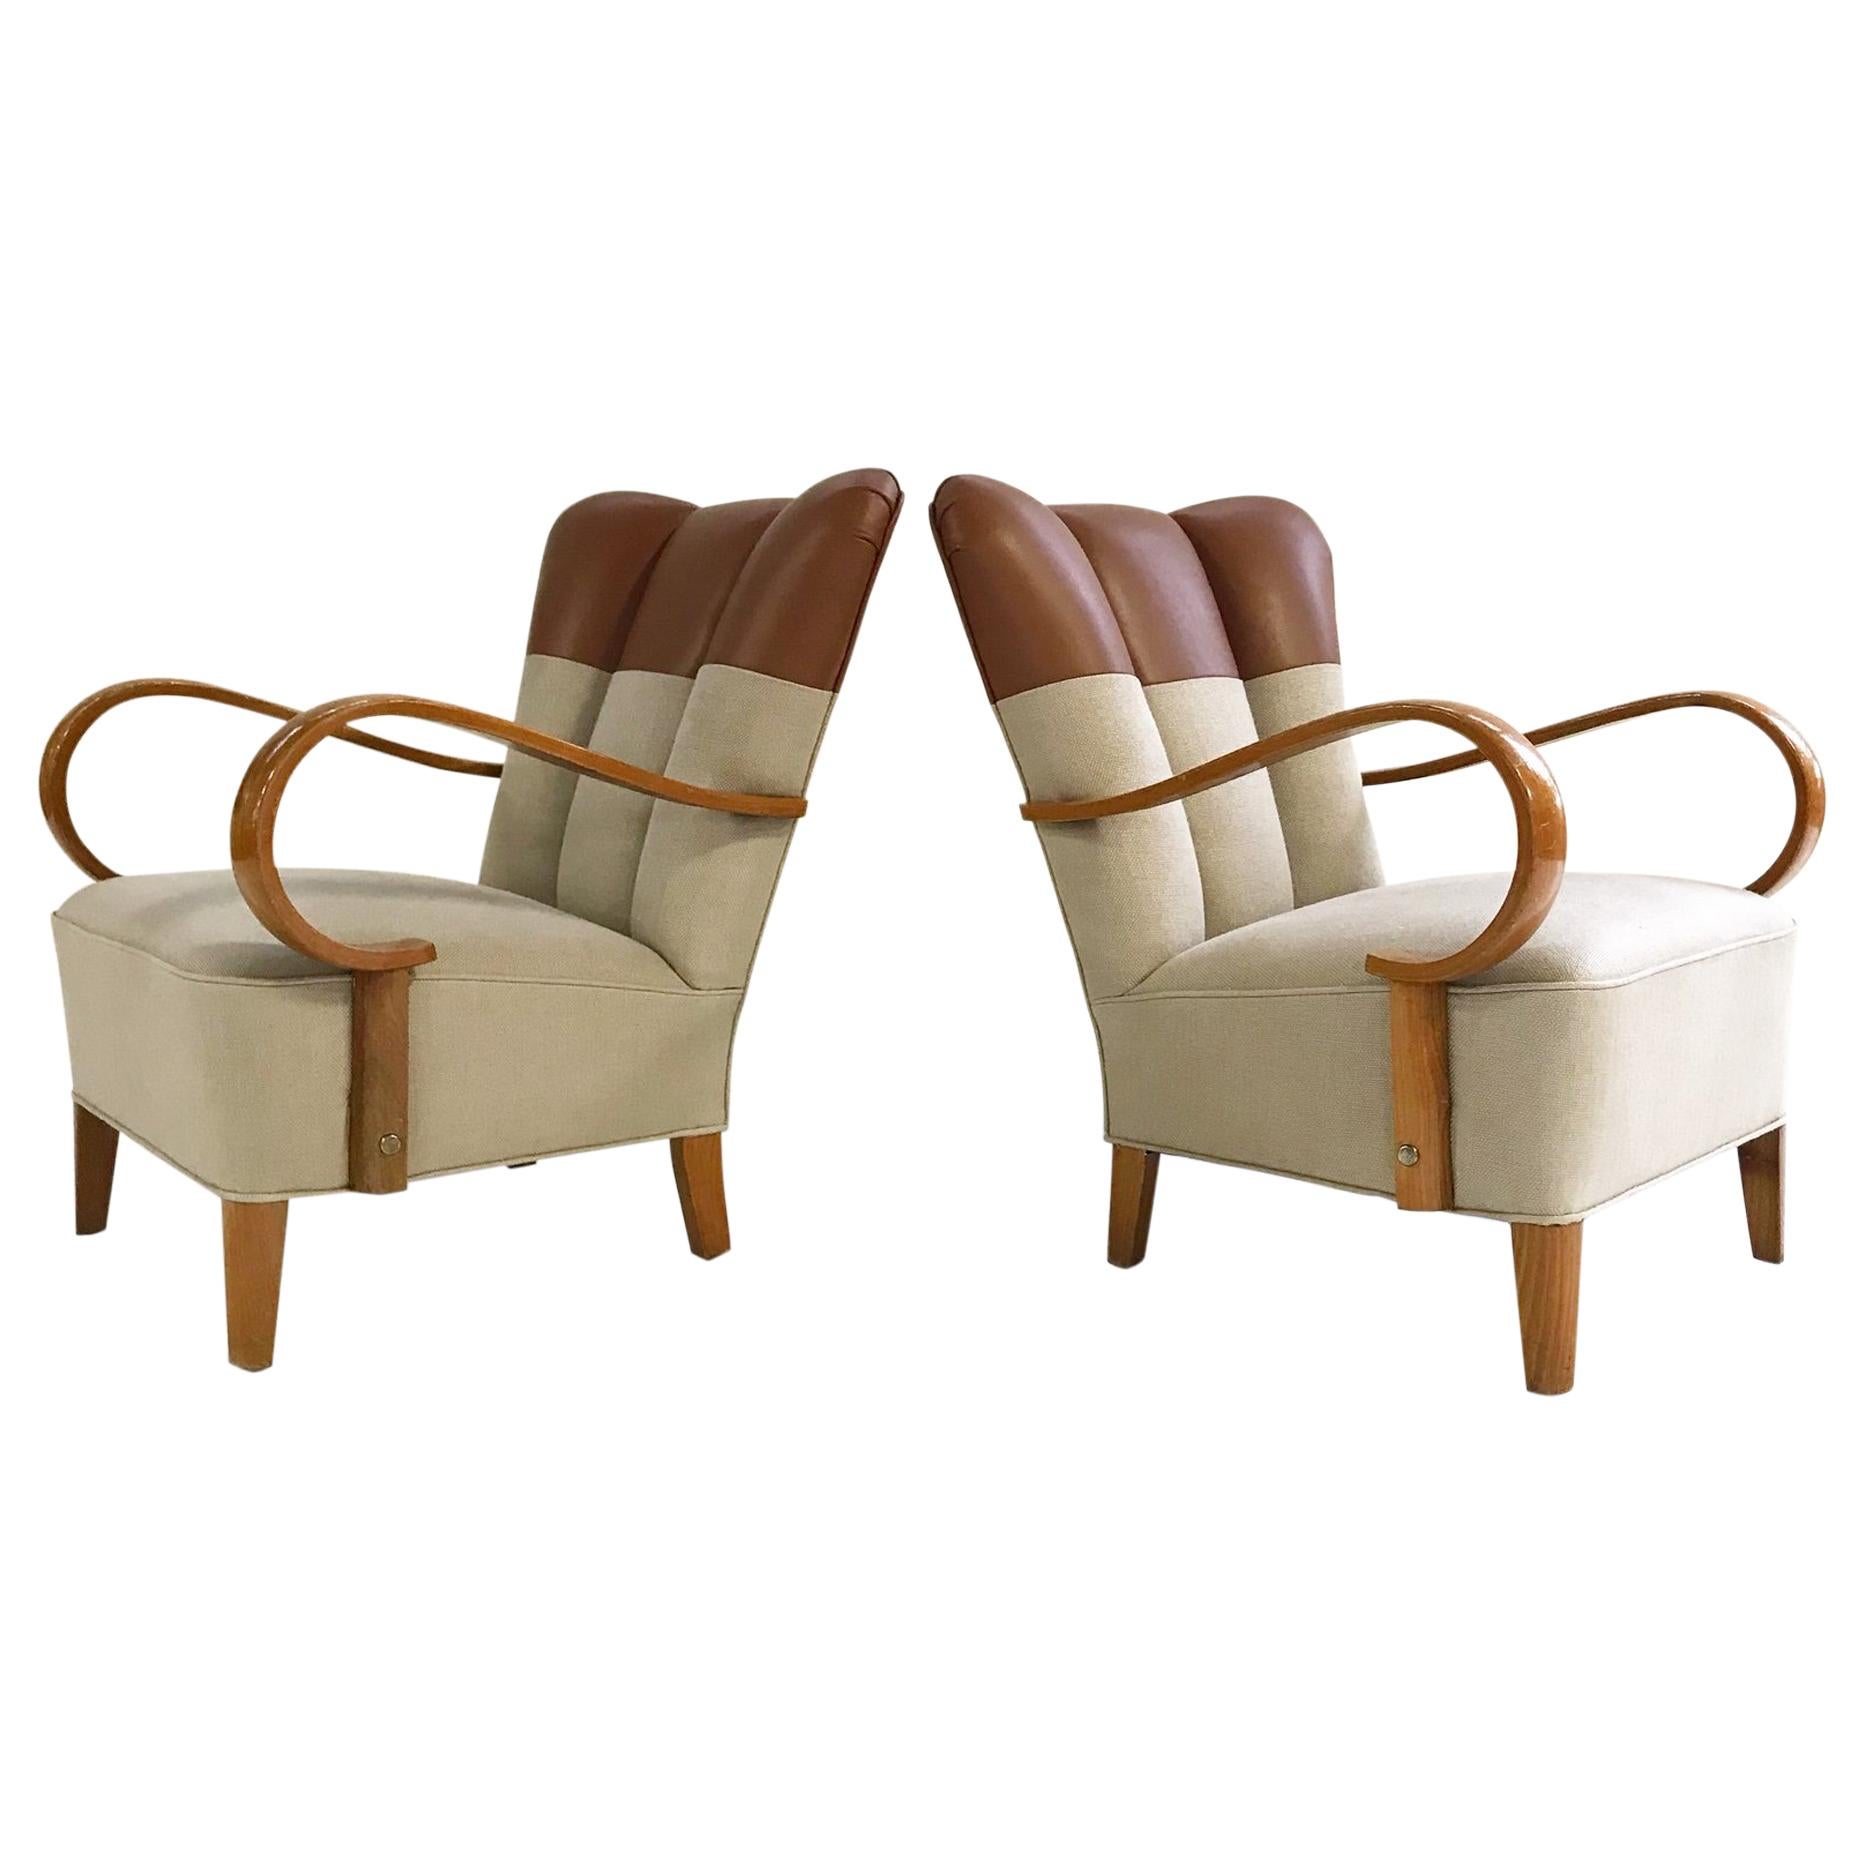 1970s, Italian Bentwood Armchairs Restored in Loro Piana Leather and Linen